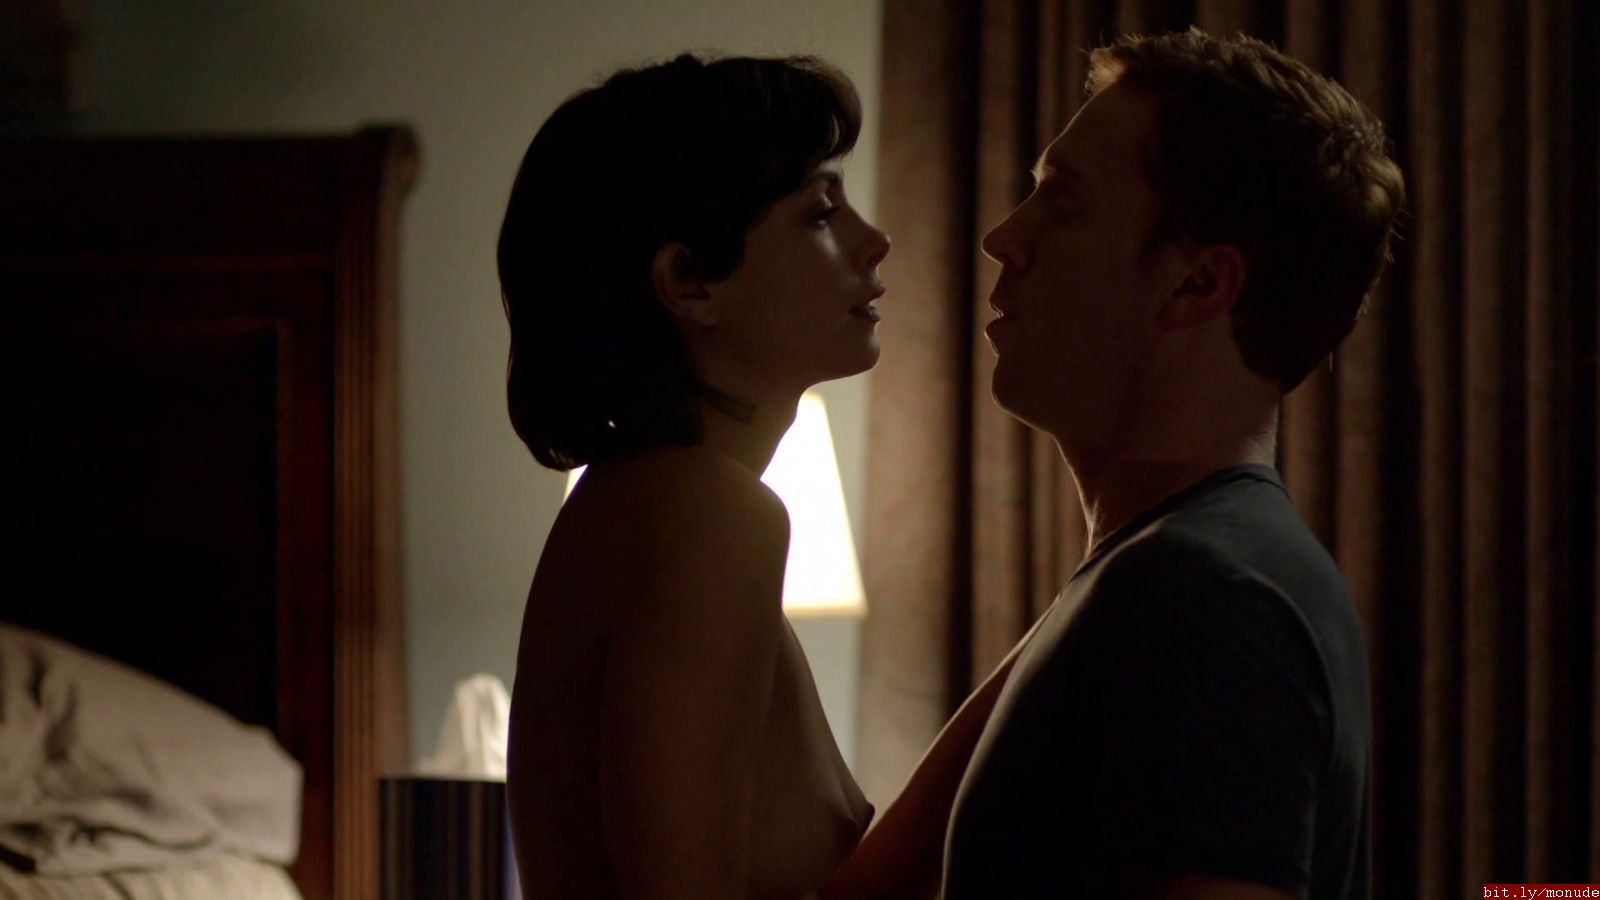 And here are Morena Baccarin’s nudes from Death in Love. 